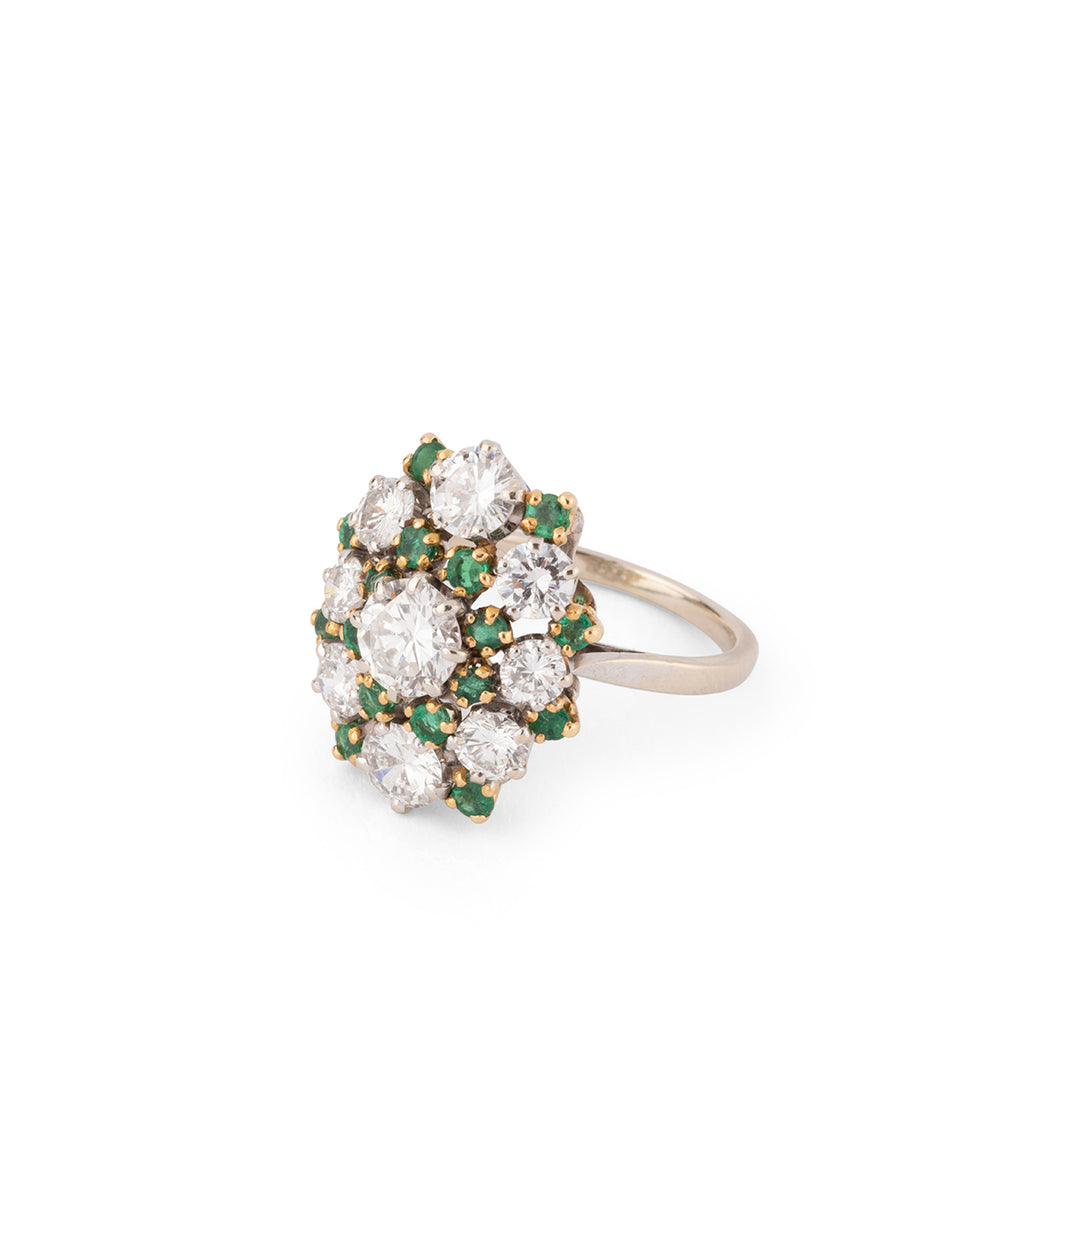 Cluster ring diamonds and emeralds "Dagny" - Caillou Paris